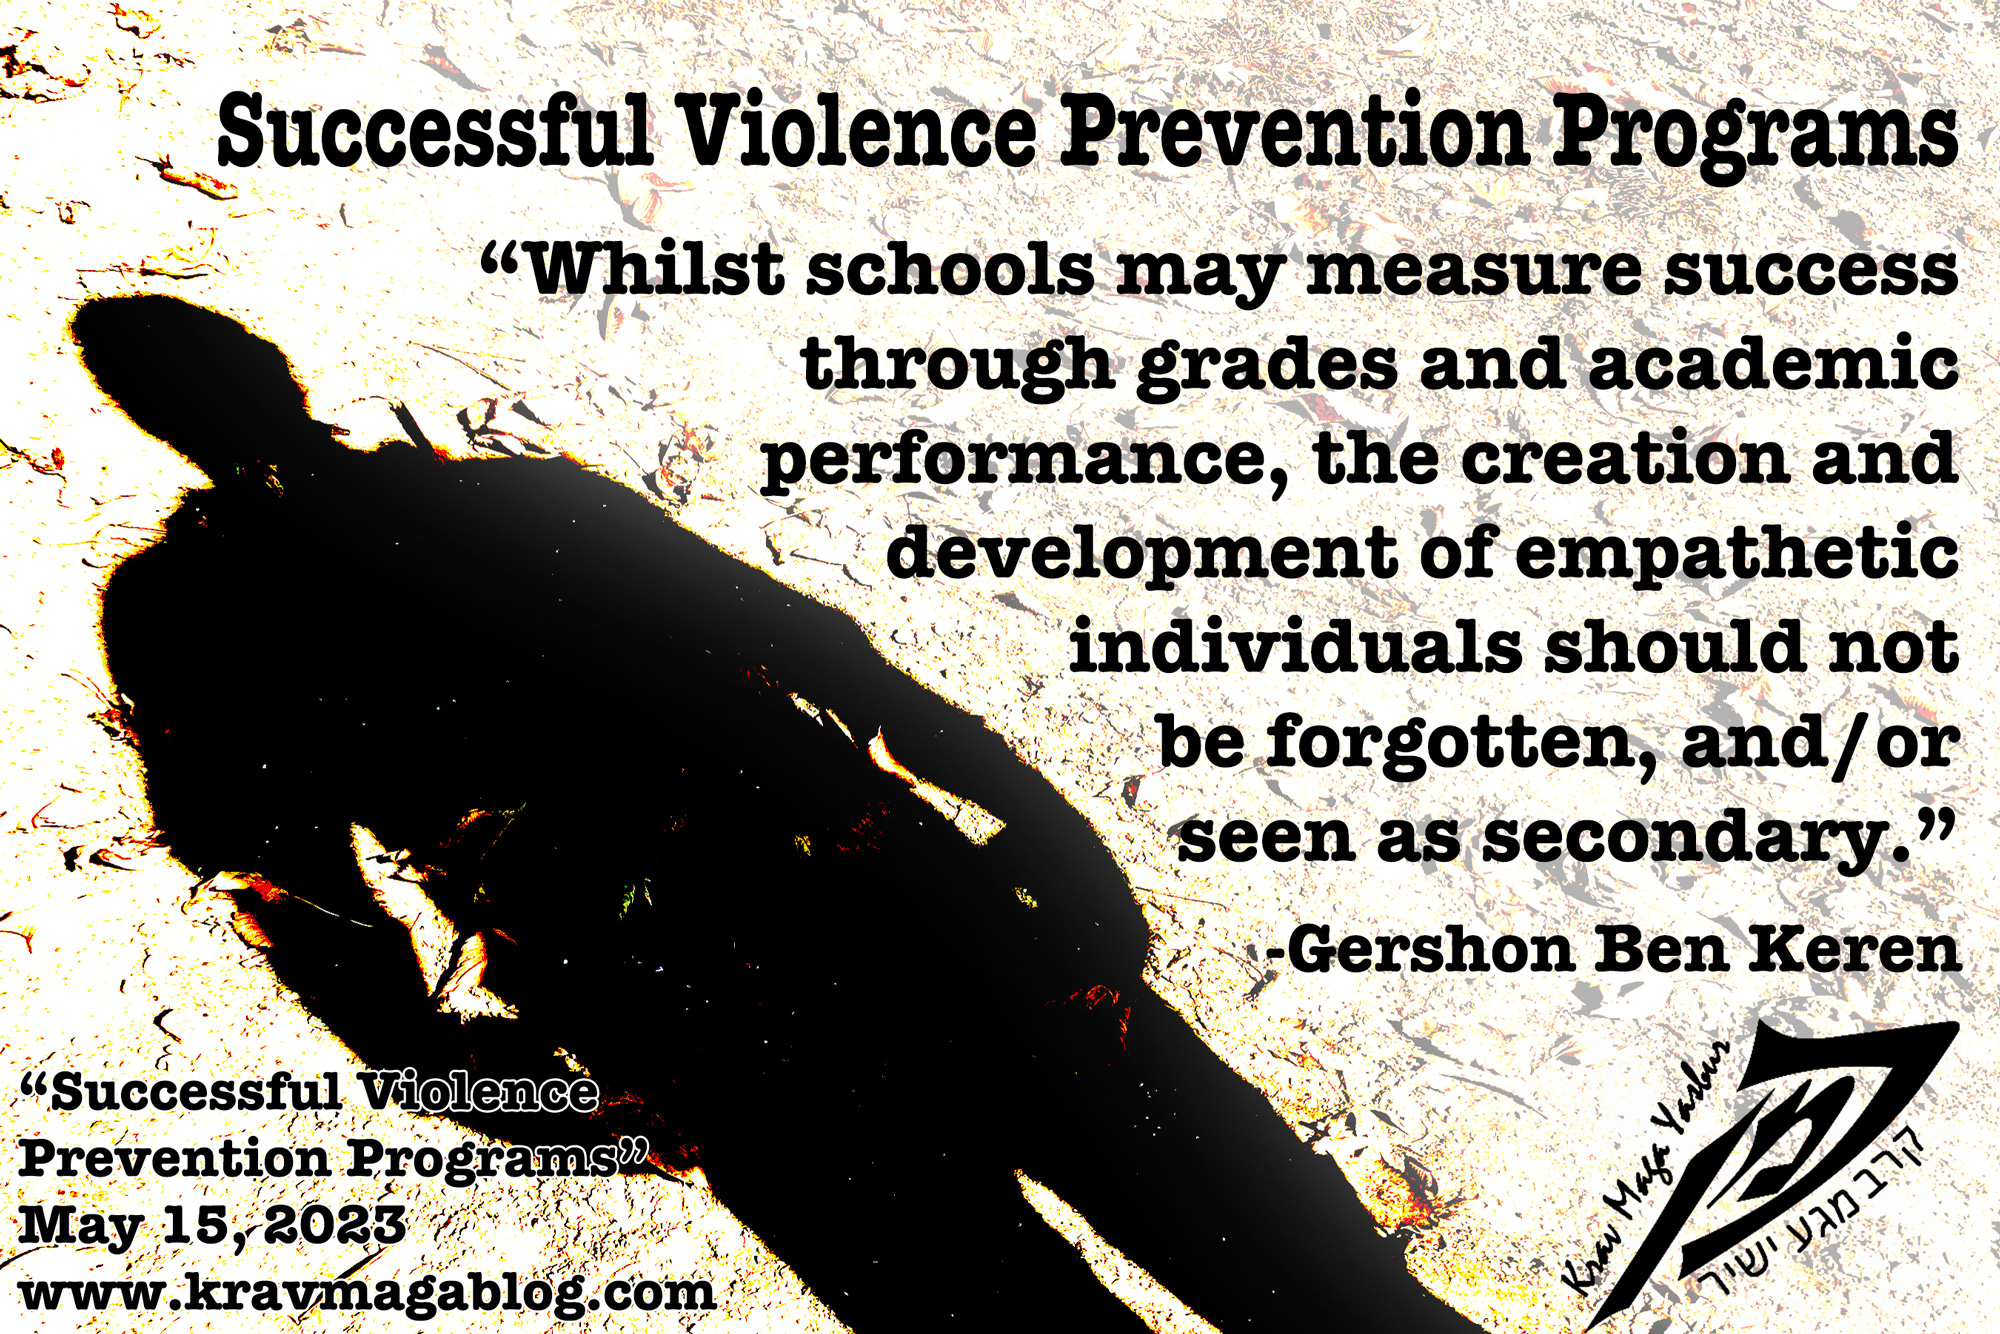 Blog About Successful Violence Prevention Programs